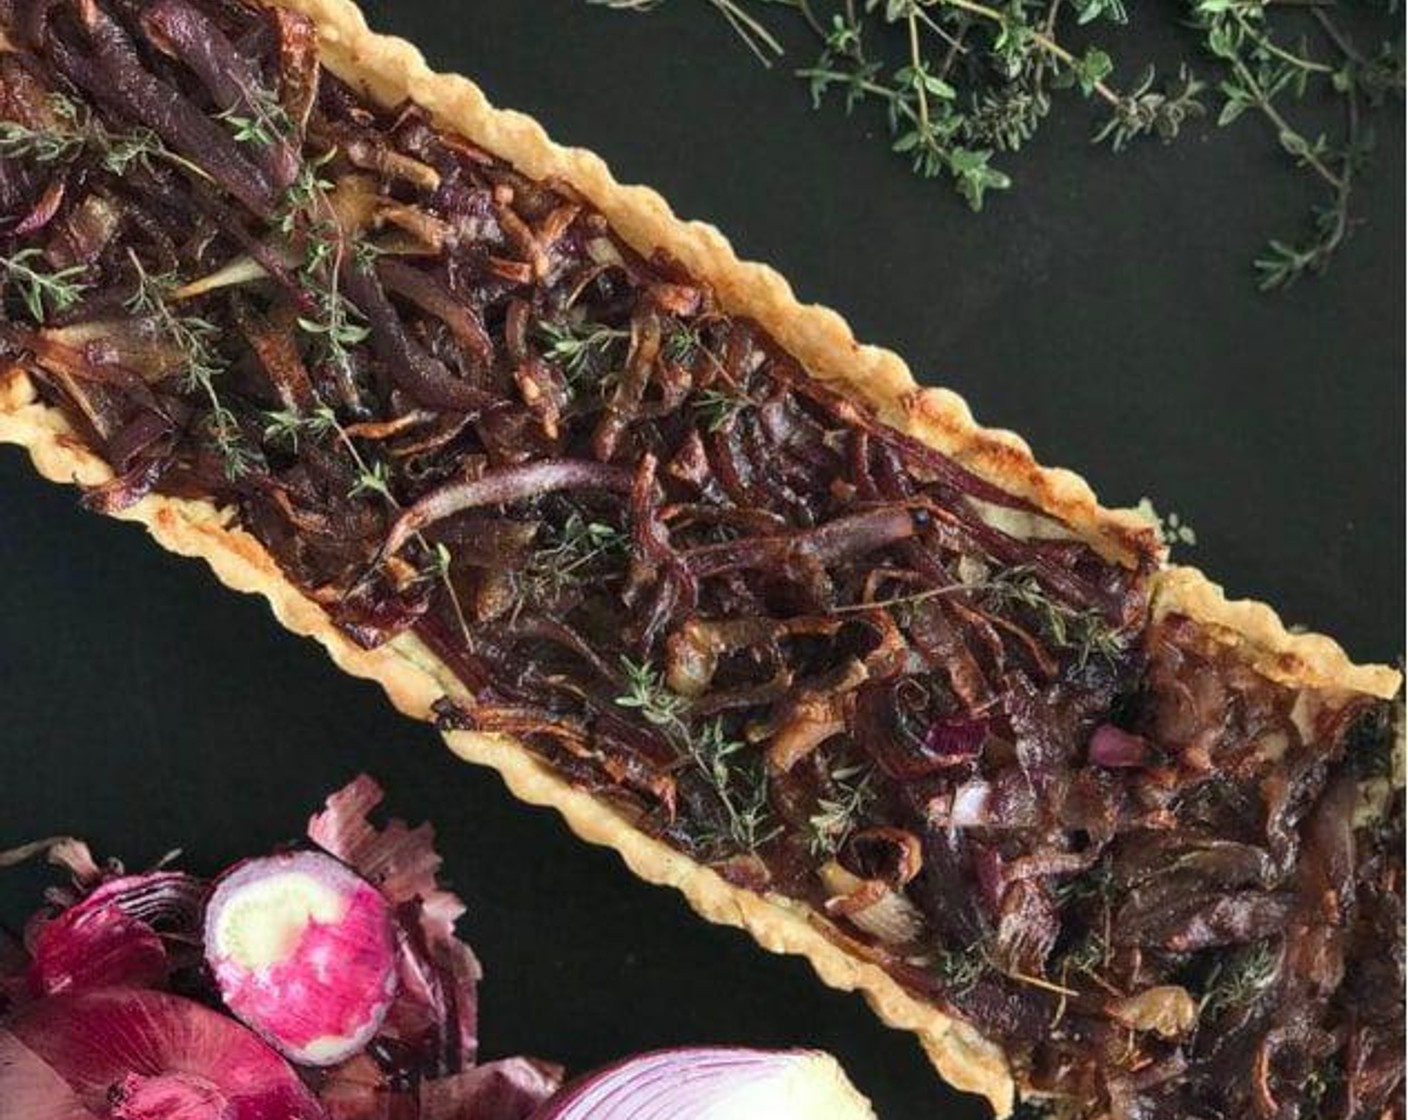 Caramelized Onion Tart with Goat Cheese and Thyme